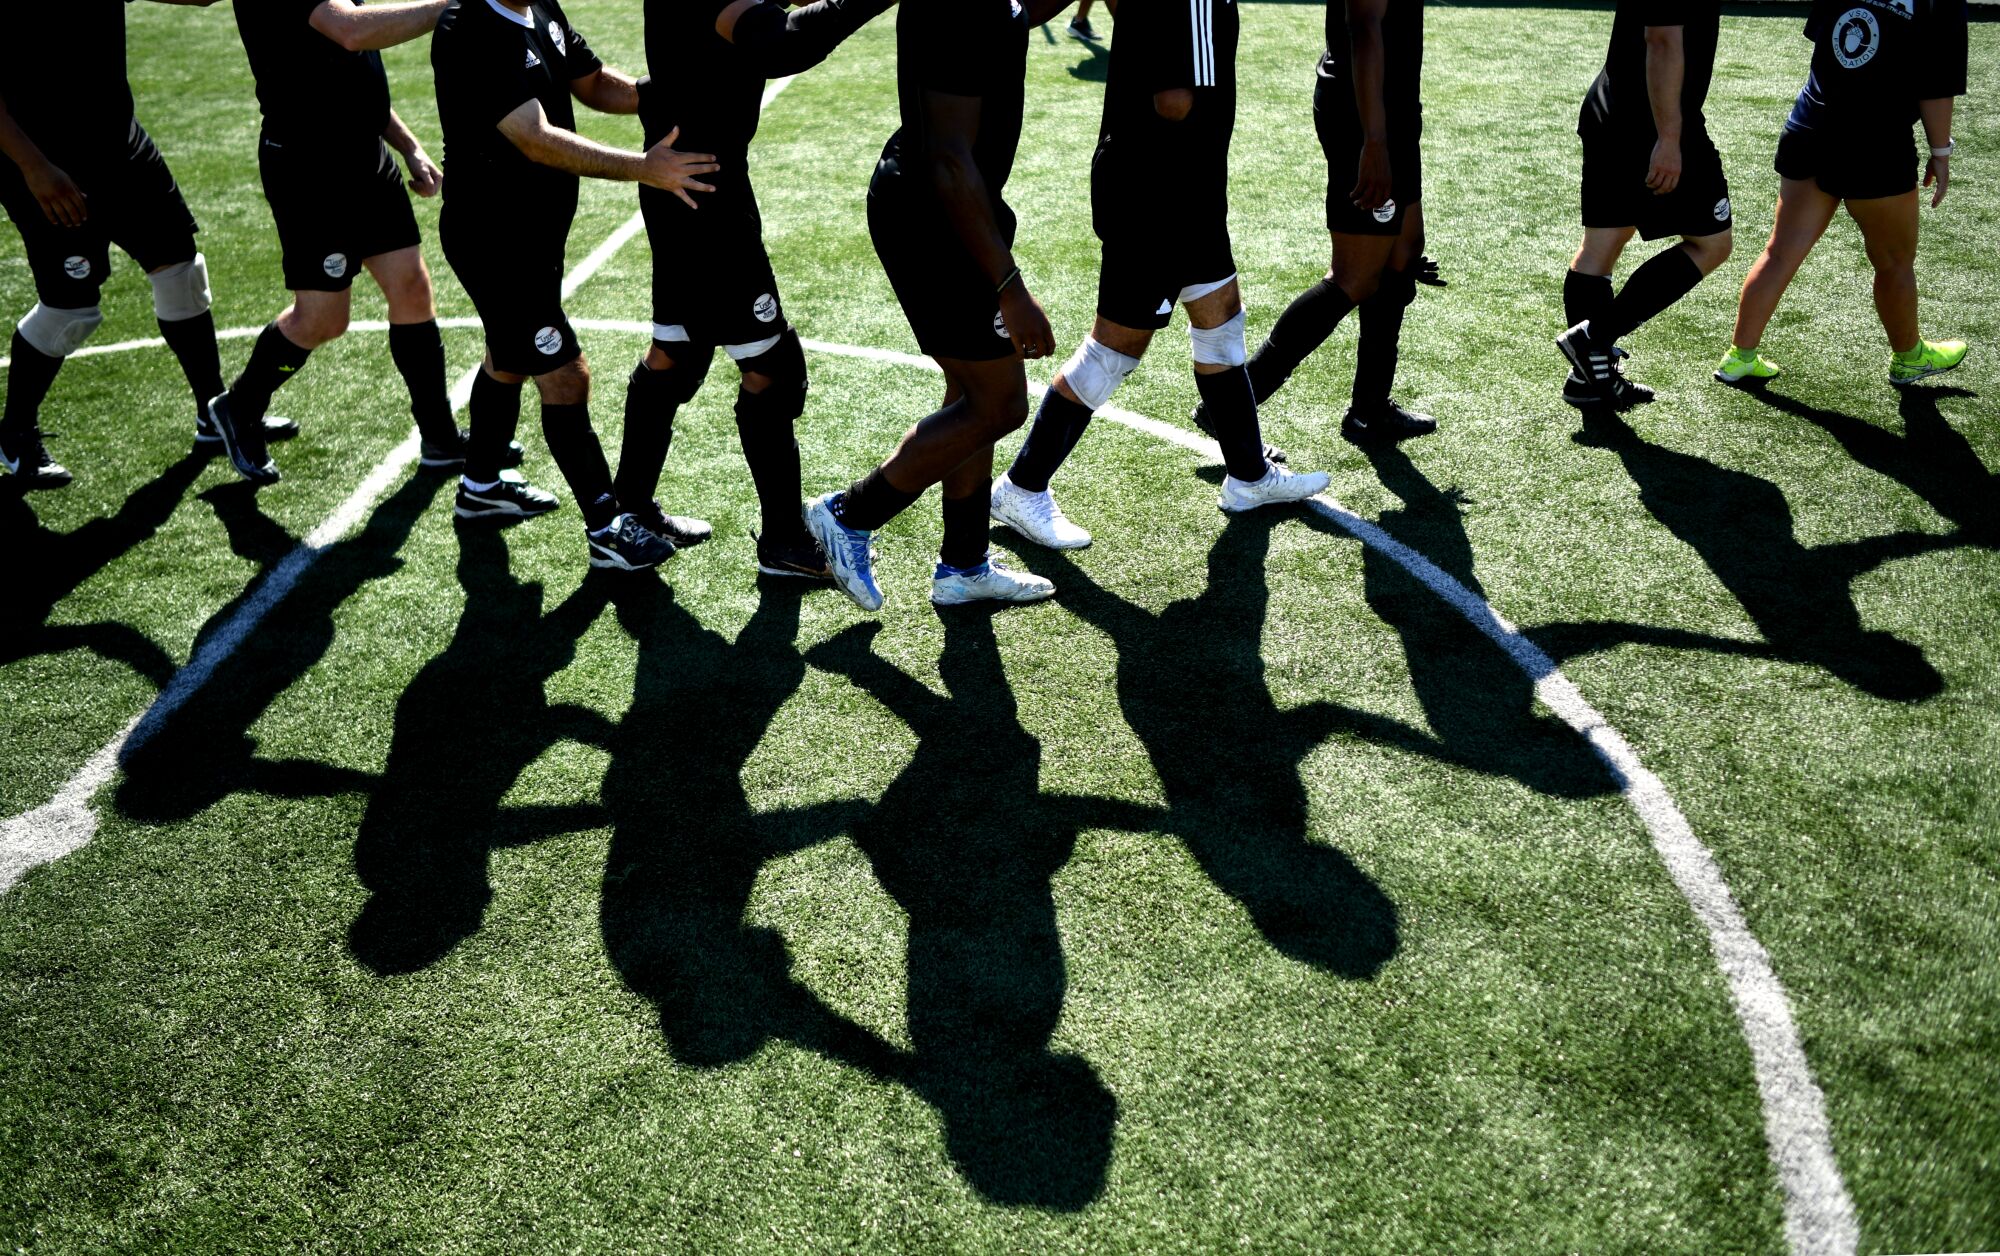 Blind soccer players hold on to one another for balance and direction as they walk in a line off a field during a water break